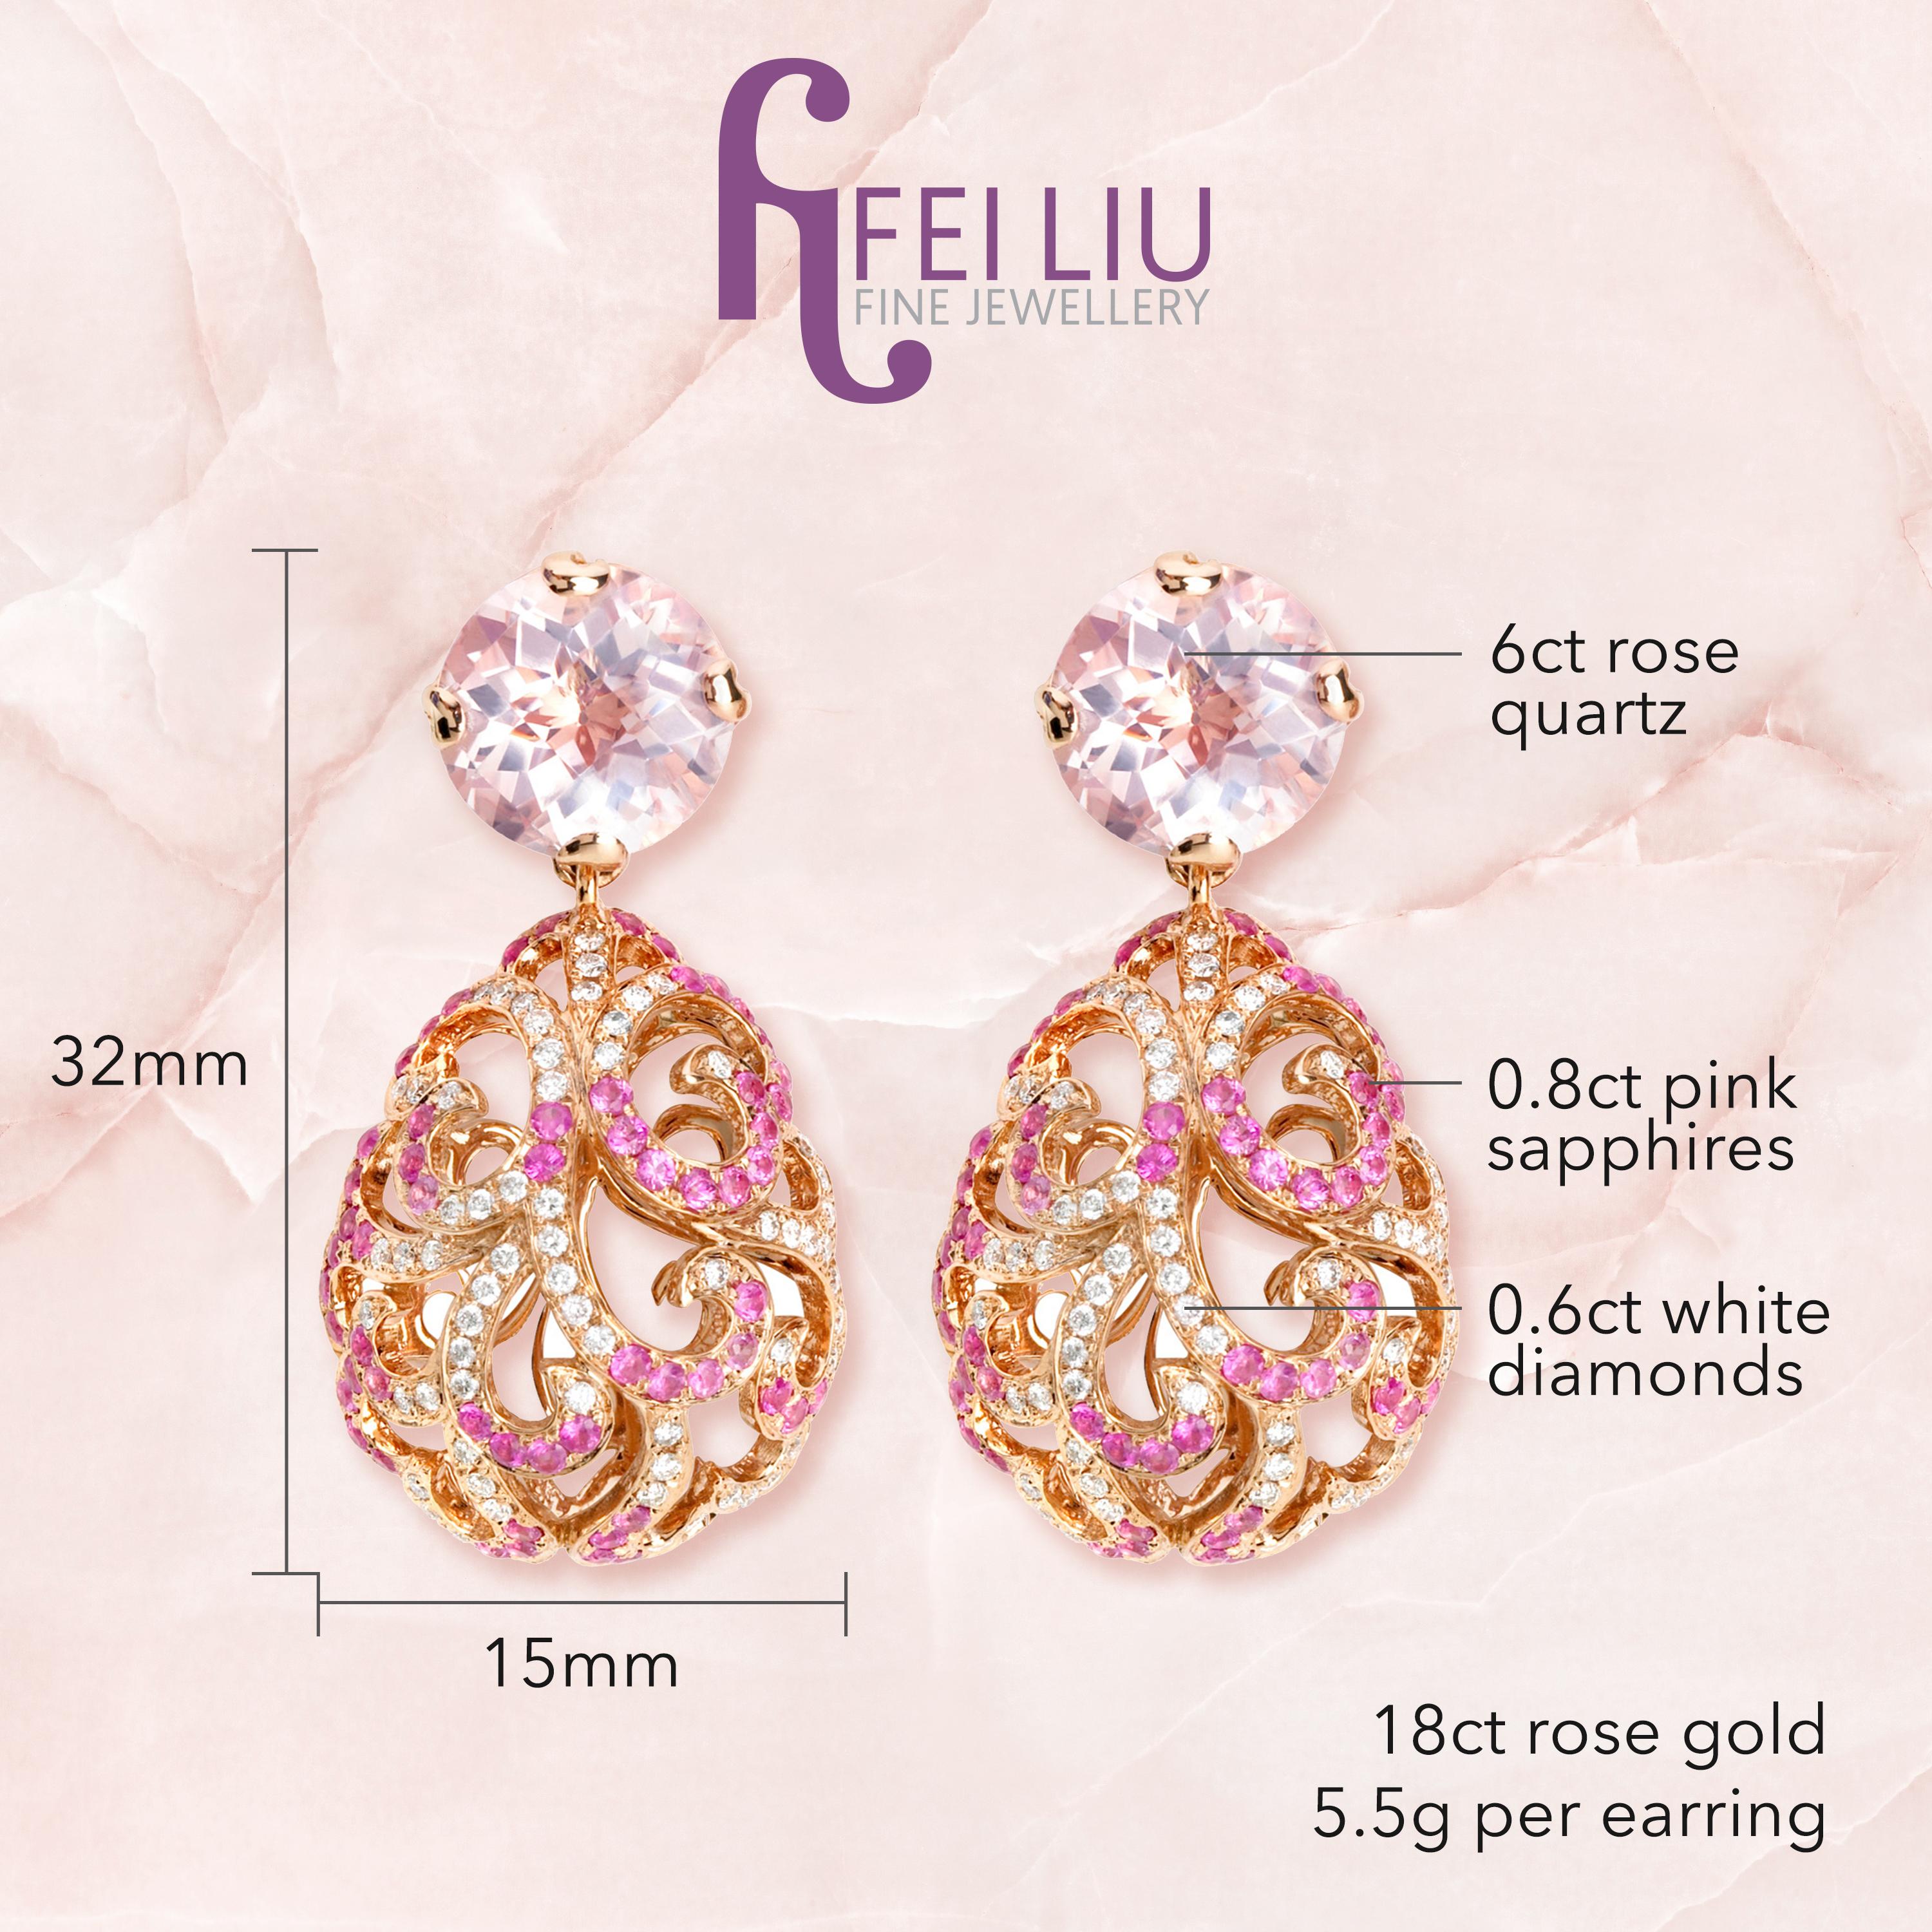 Description:
Whispering rose quartz drop earrings with 6ct rose quartz, 0.6ct white diamonds and 0.8ct pink sapphires, set in 18ct rose gold.

Inspiration:
Emulating femininity and glamour, the Whispering collection is full of colour and form.